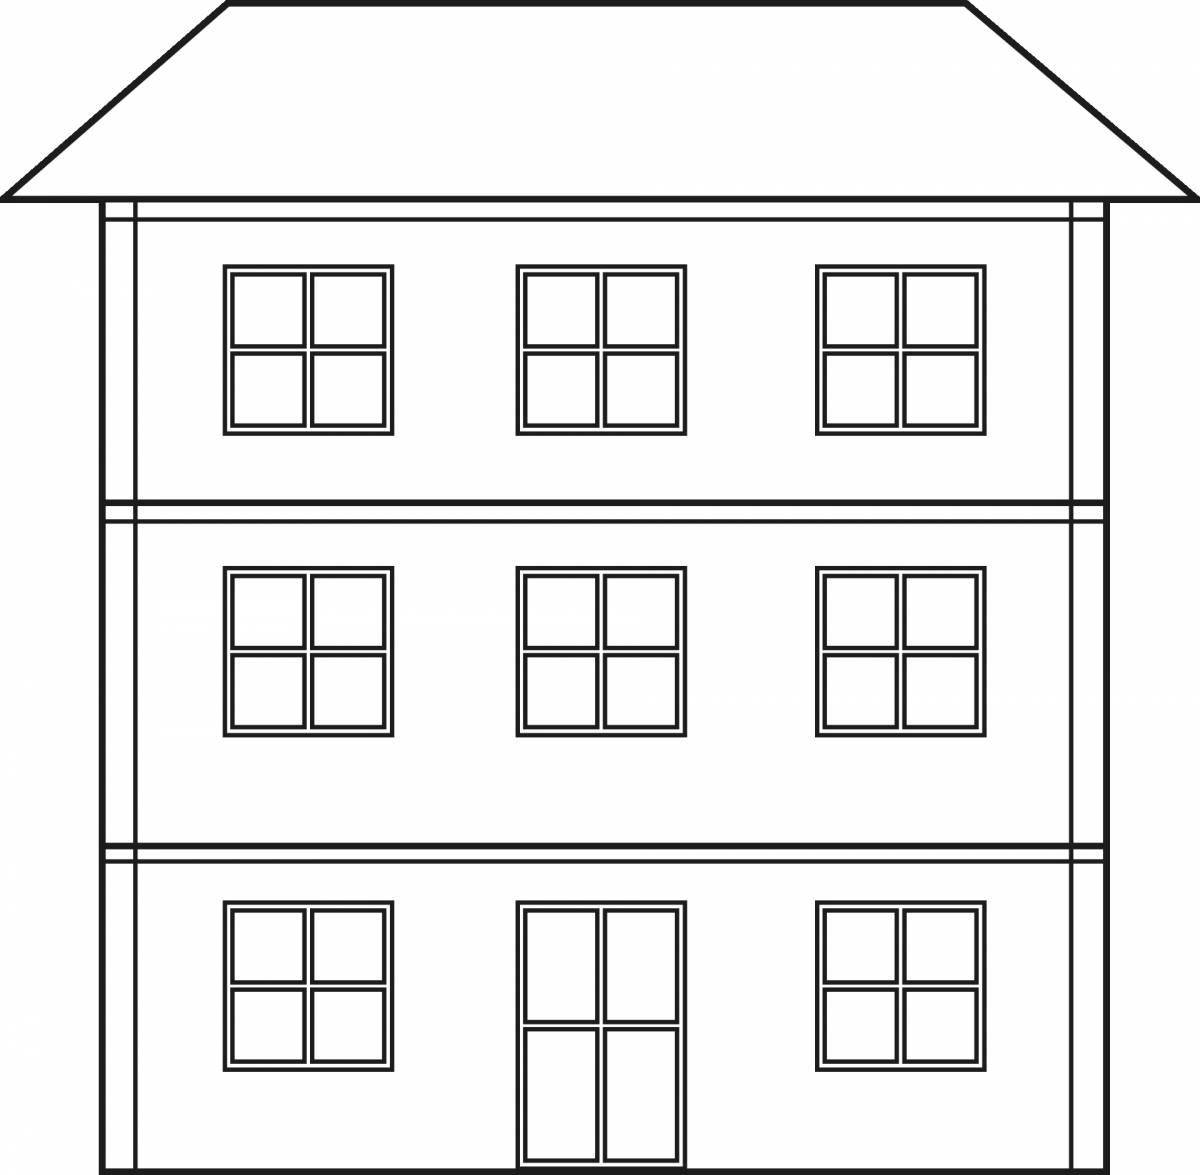 Coloring page of a delightful two-story house